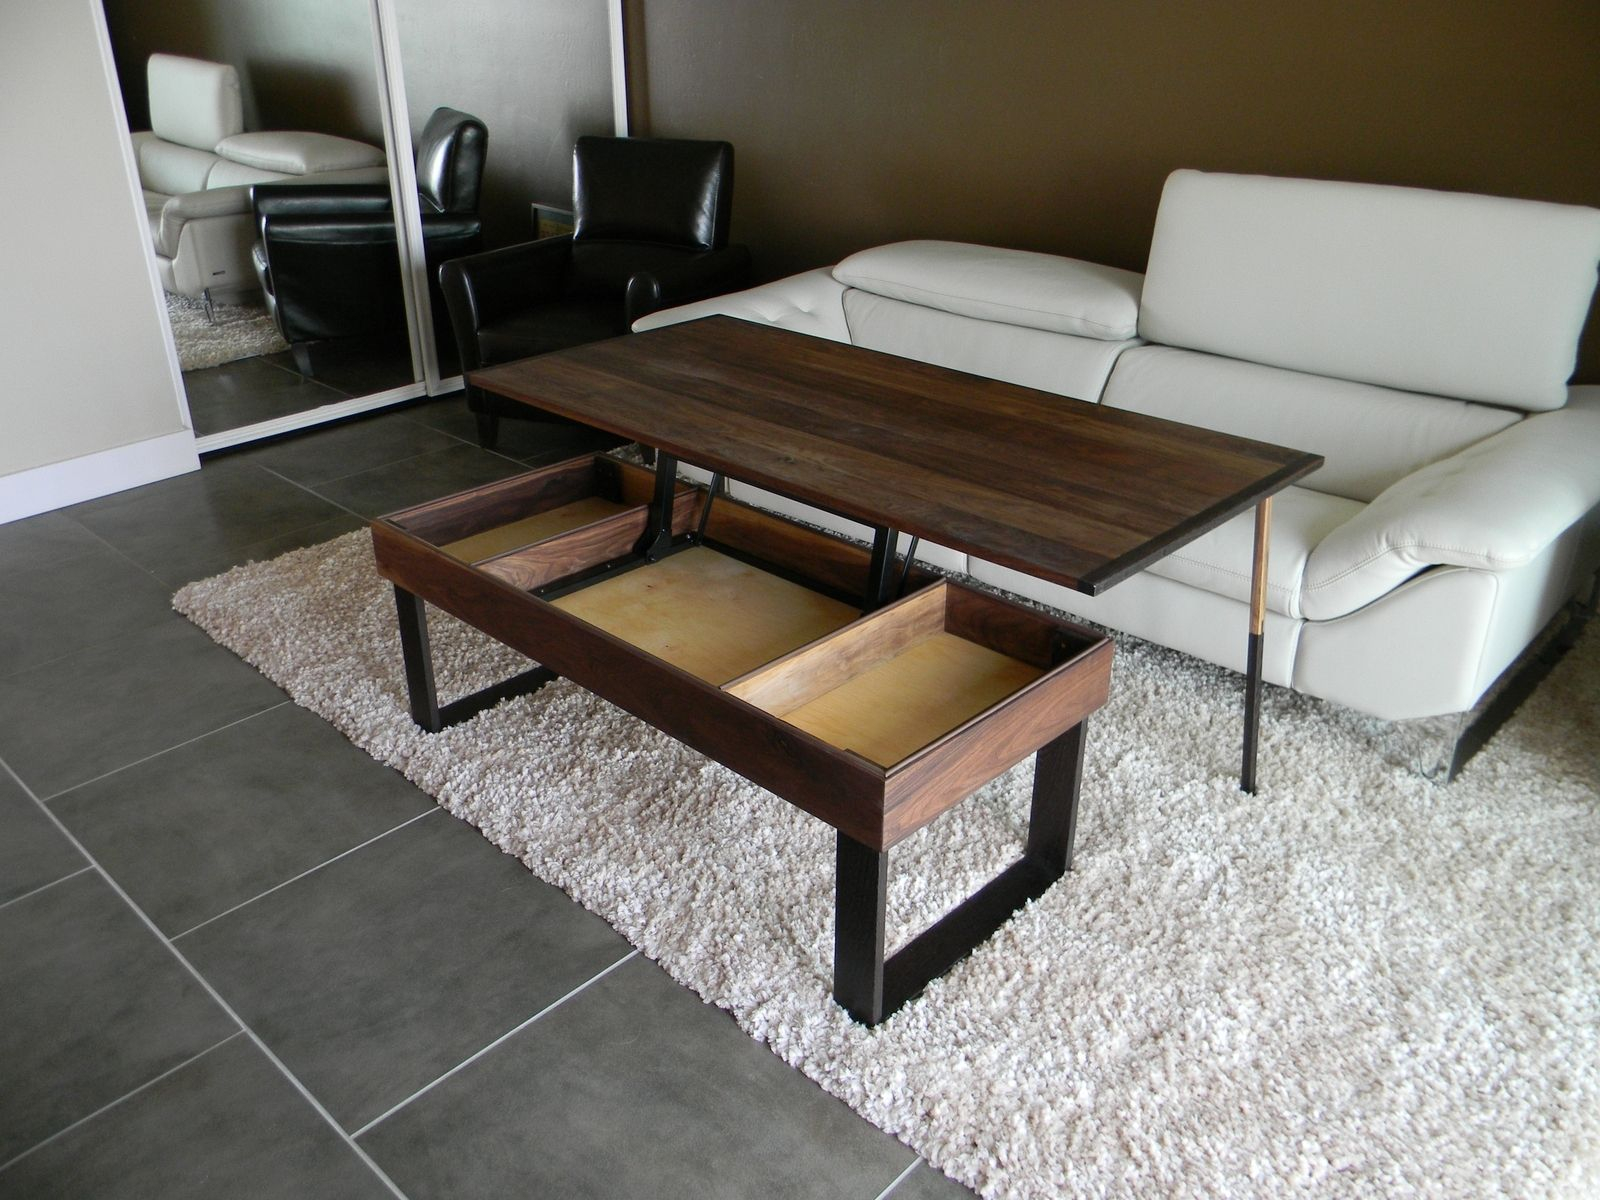 No More Awkward Trays With This Pop Up Coffee Table Jonathan pertaining to size 1600 X 1200